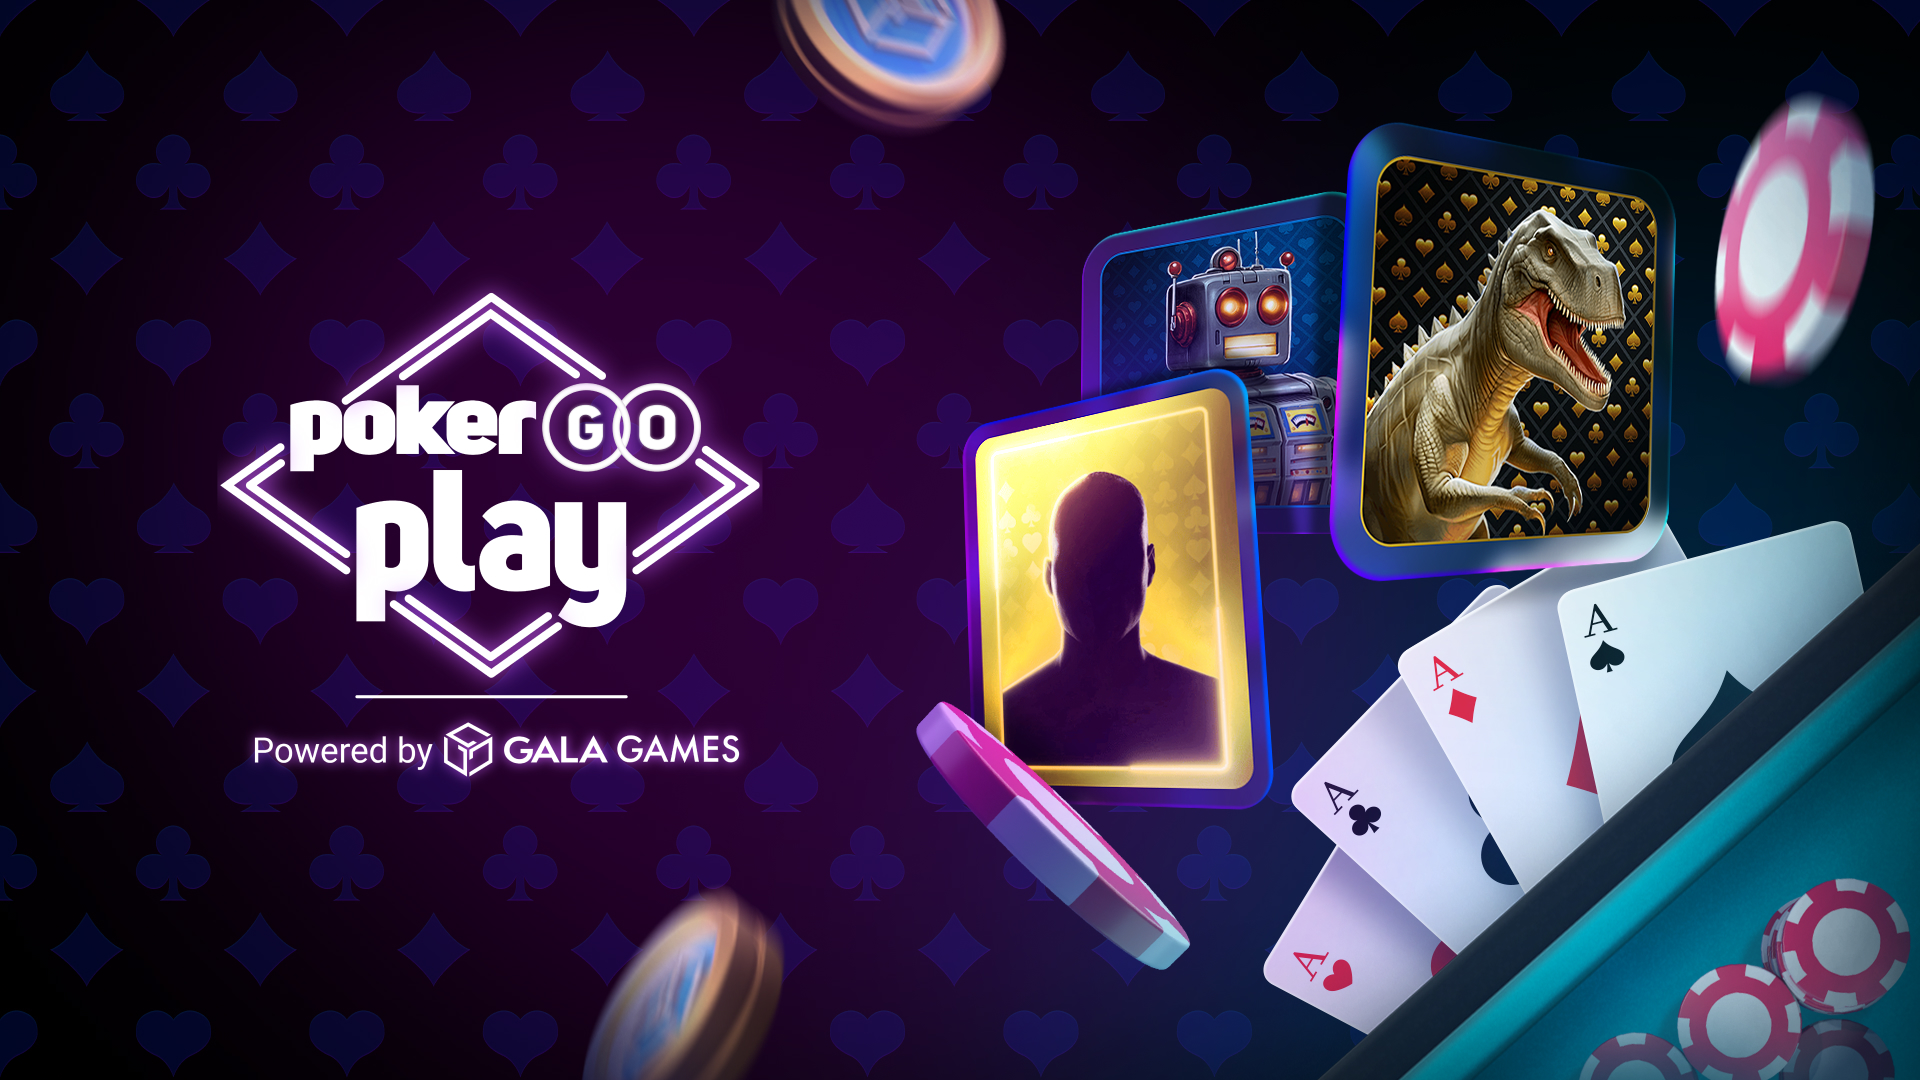 PokerGO Play has some big updates and exciting news for players!